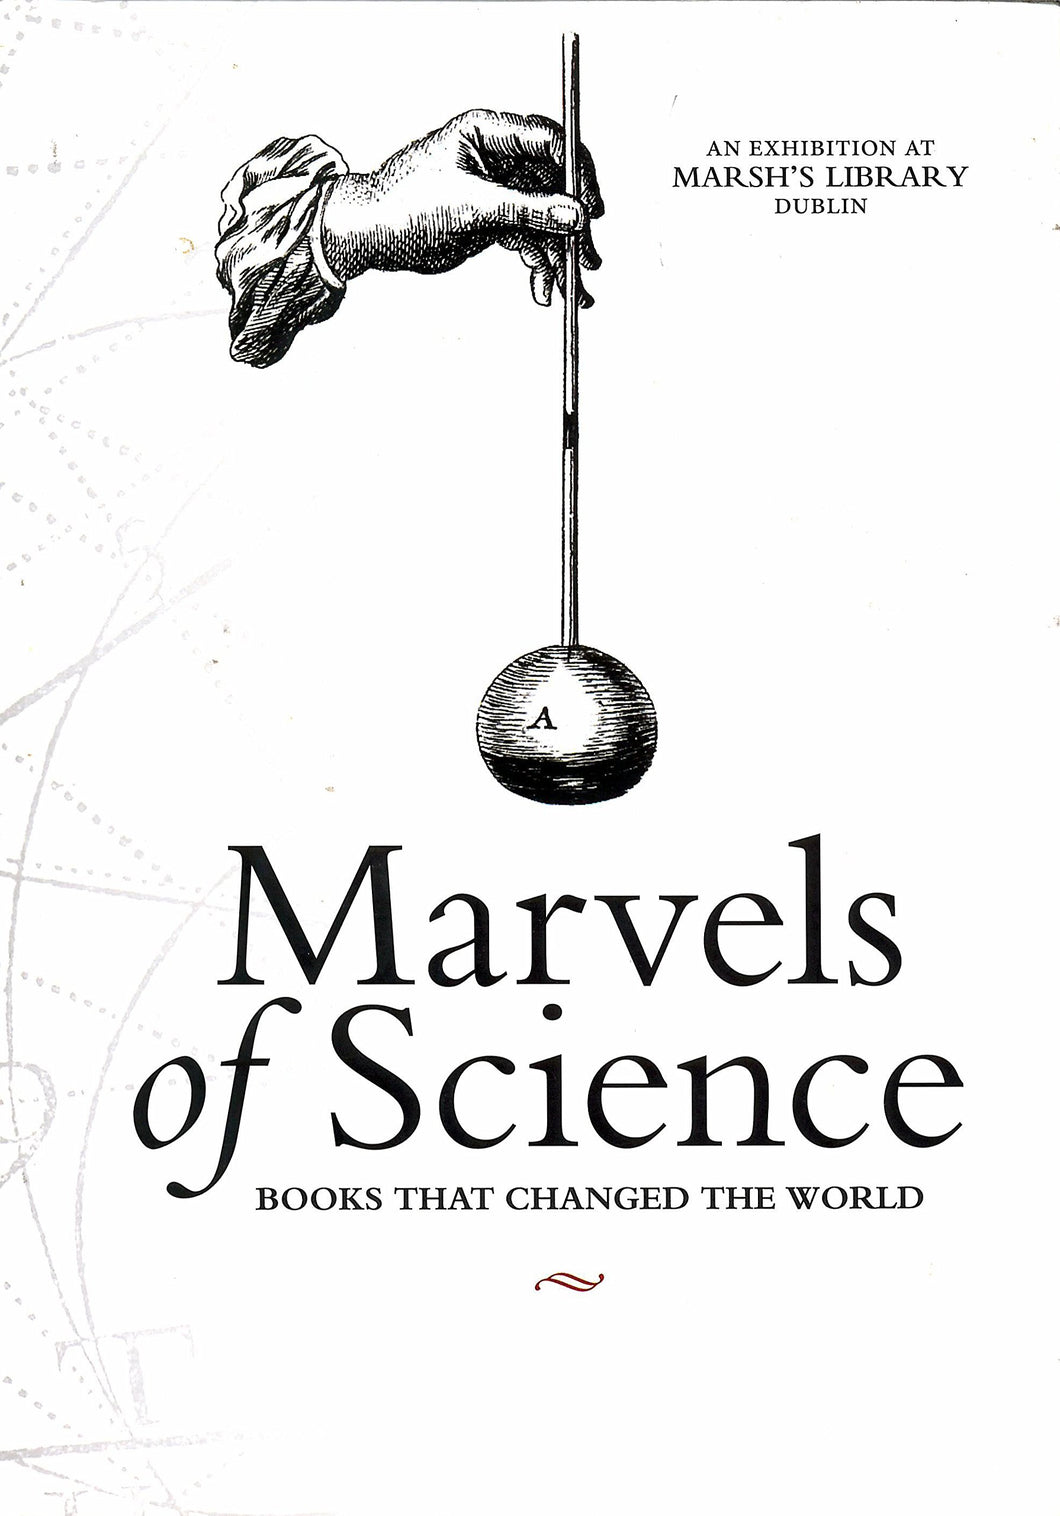 Marvels of Science - Books that Changed the World (an Exhibition at Marsh's Library Dublin)